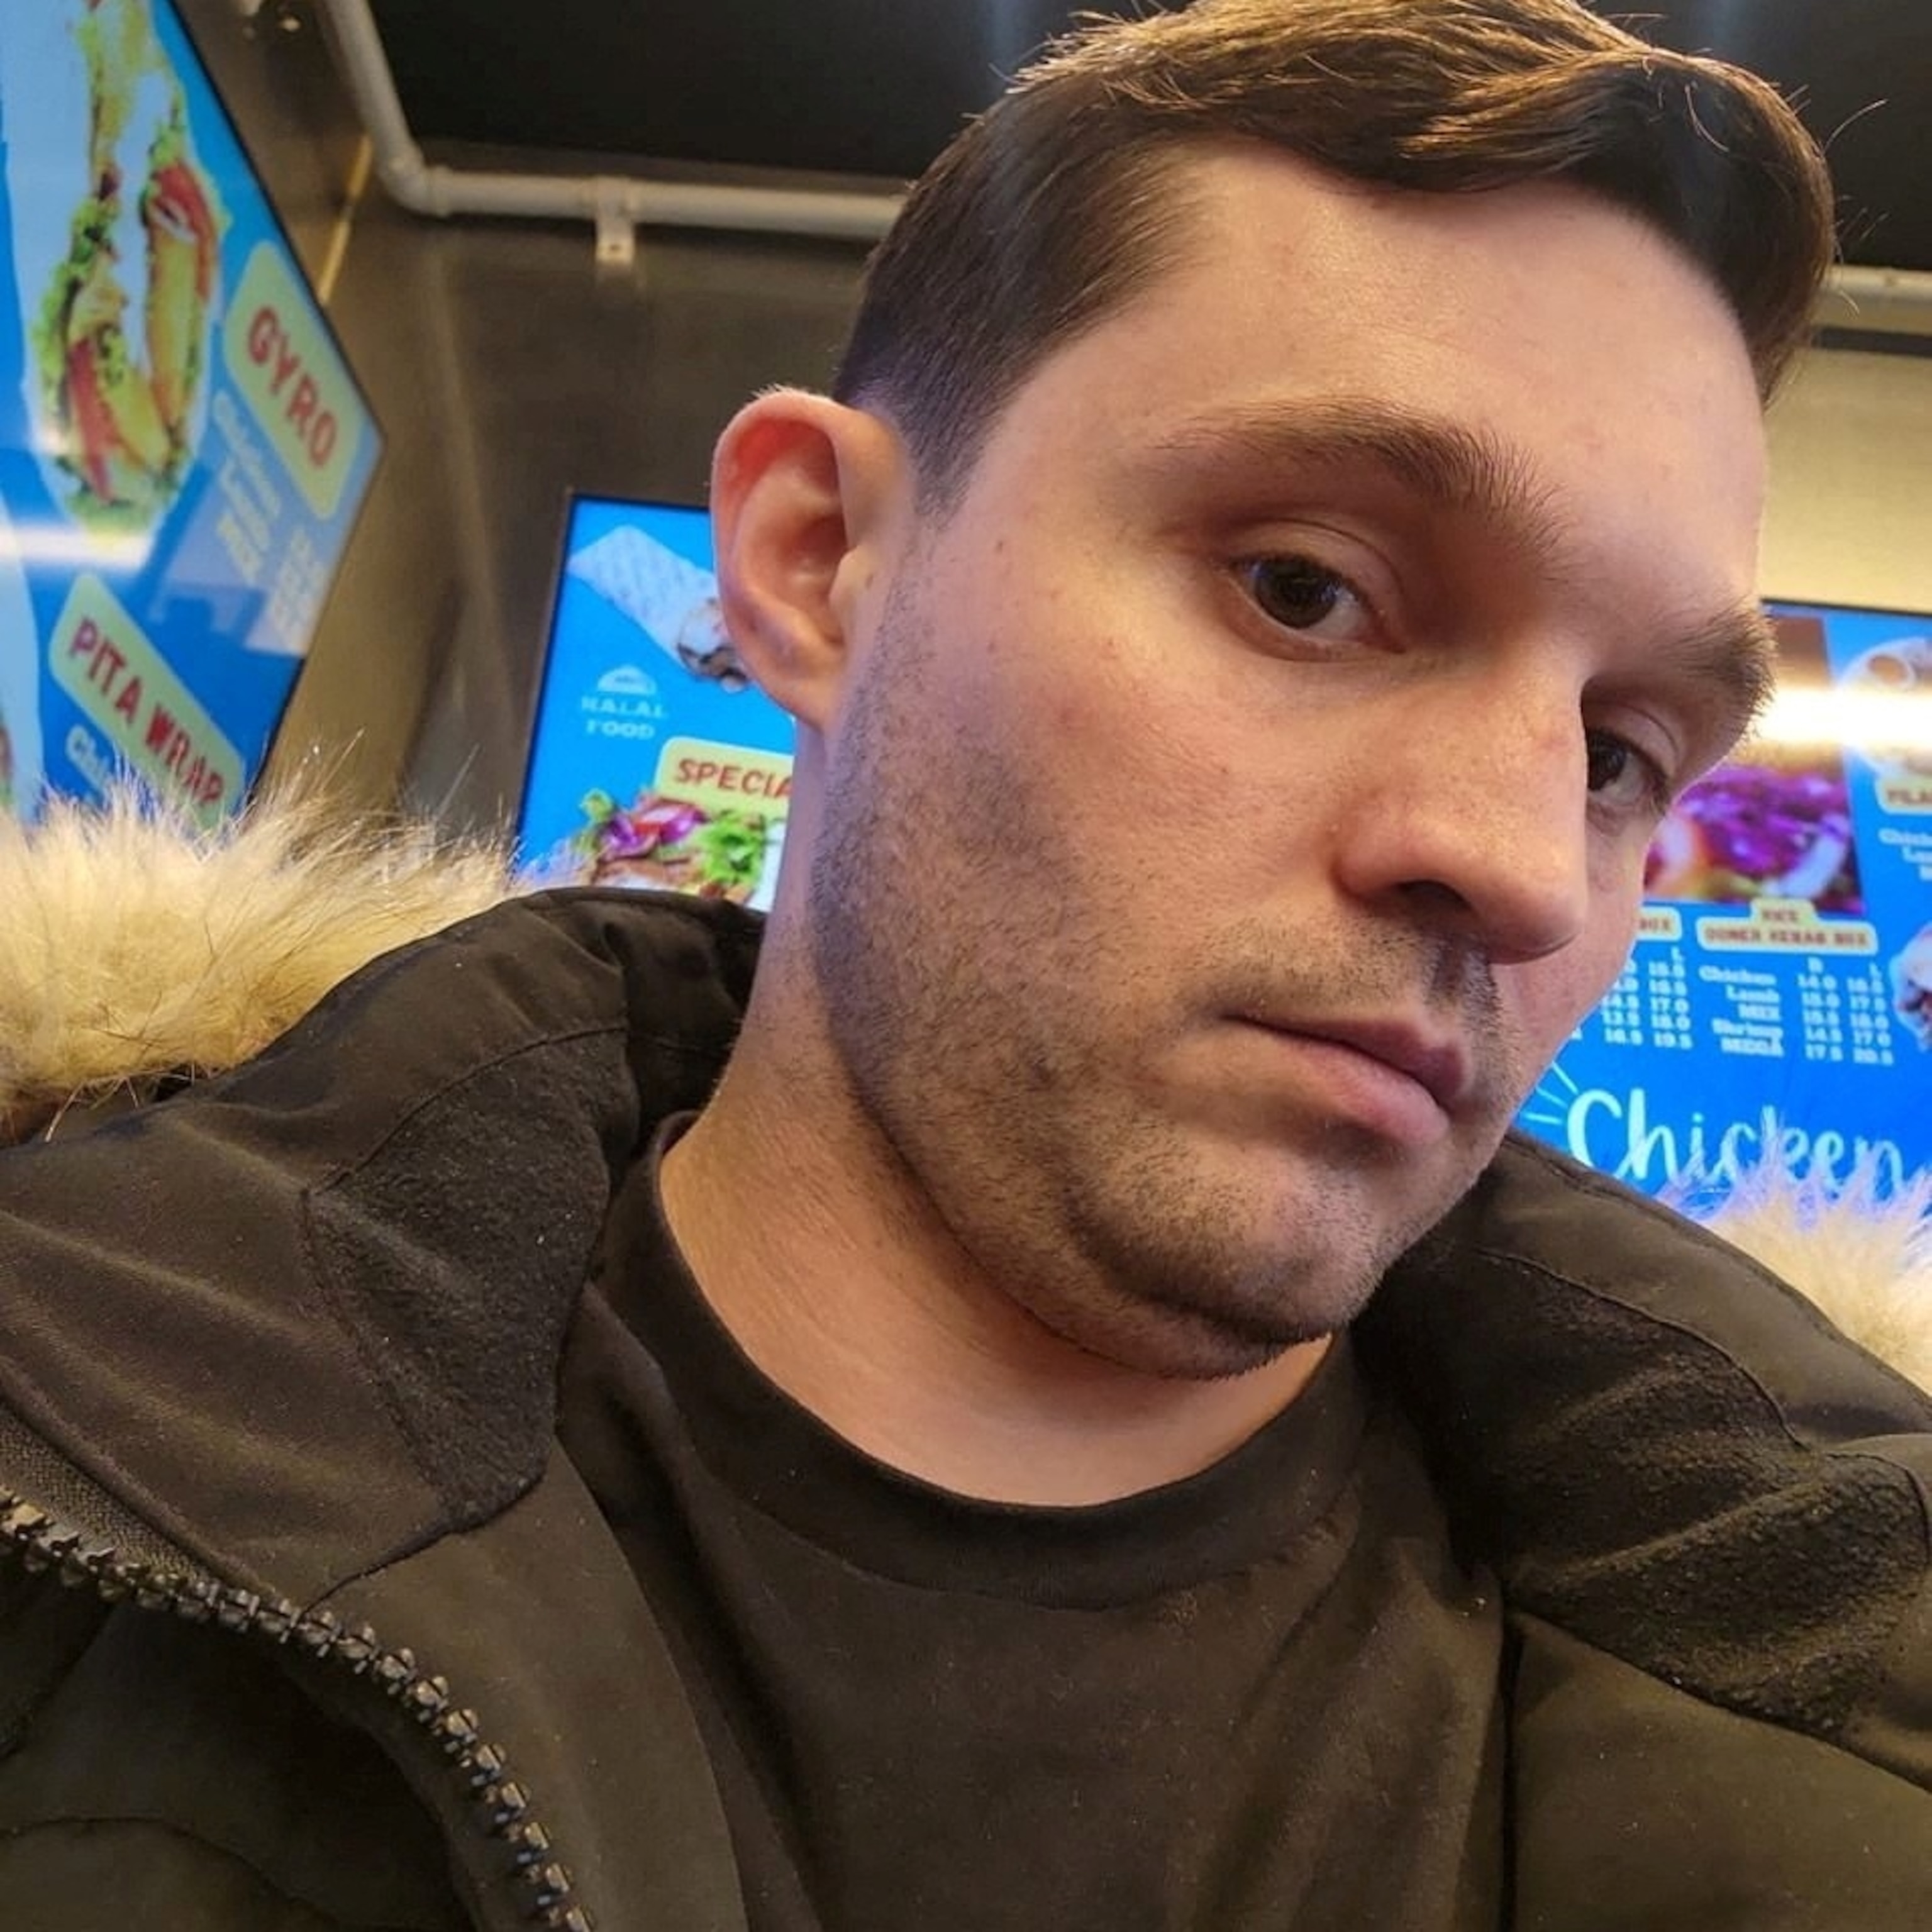 PHOTO: Gordon Black, a U.S. serviceman detained in Russia, poses for a selfie in this picture obtained from social media, in an unspecified location, released on Feb. 2023.